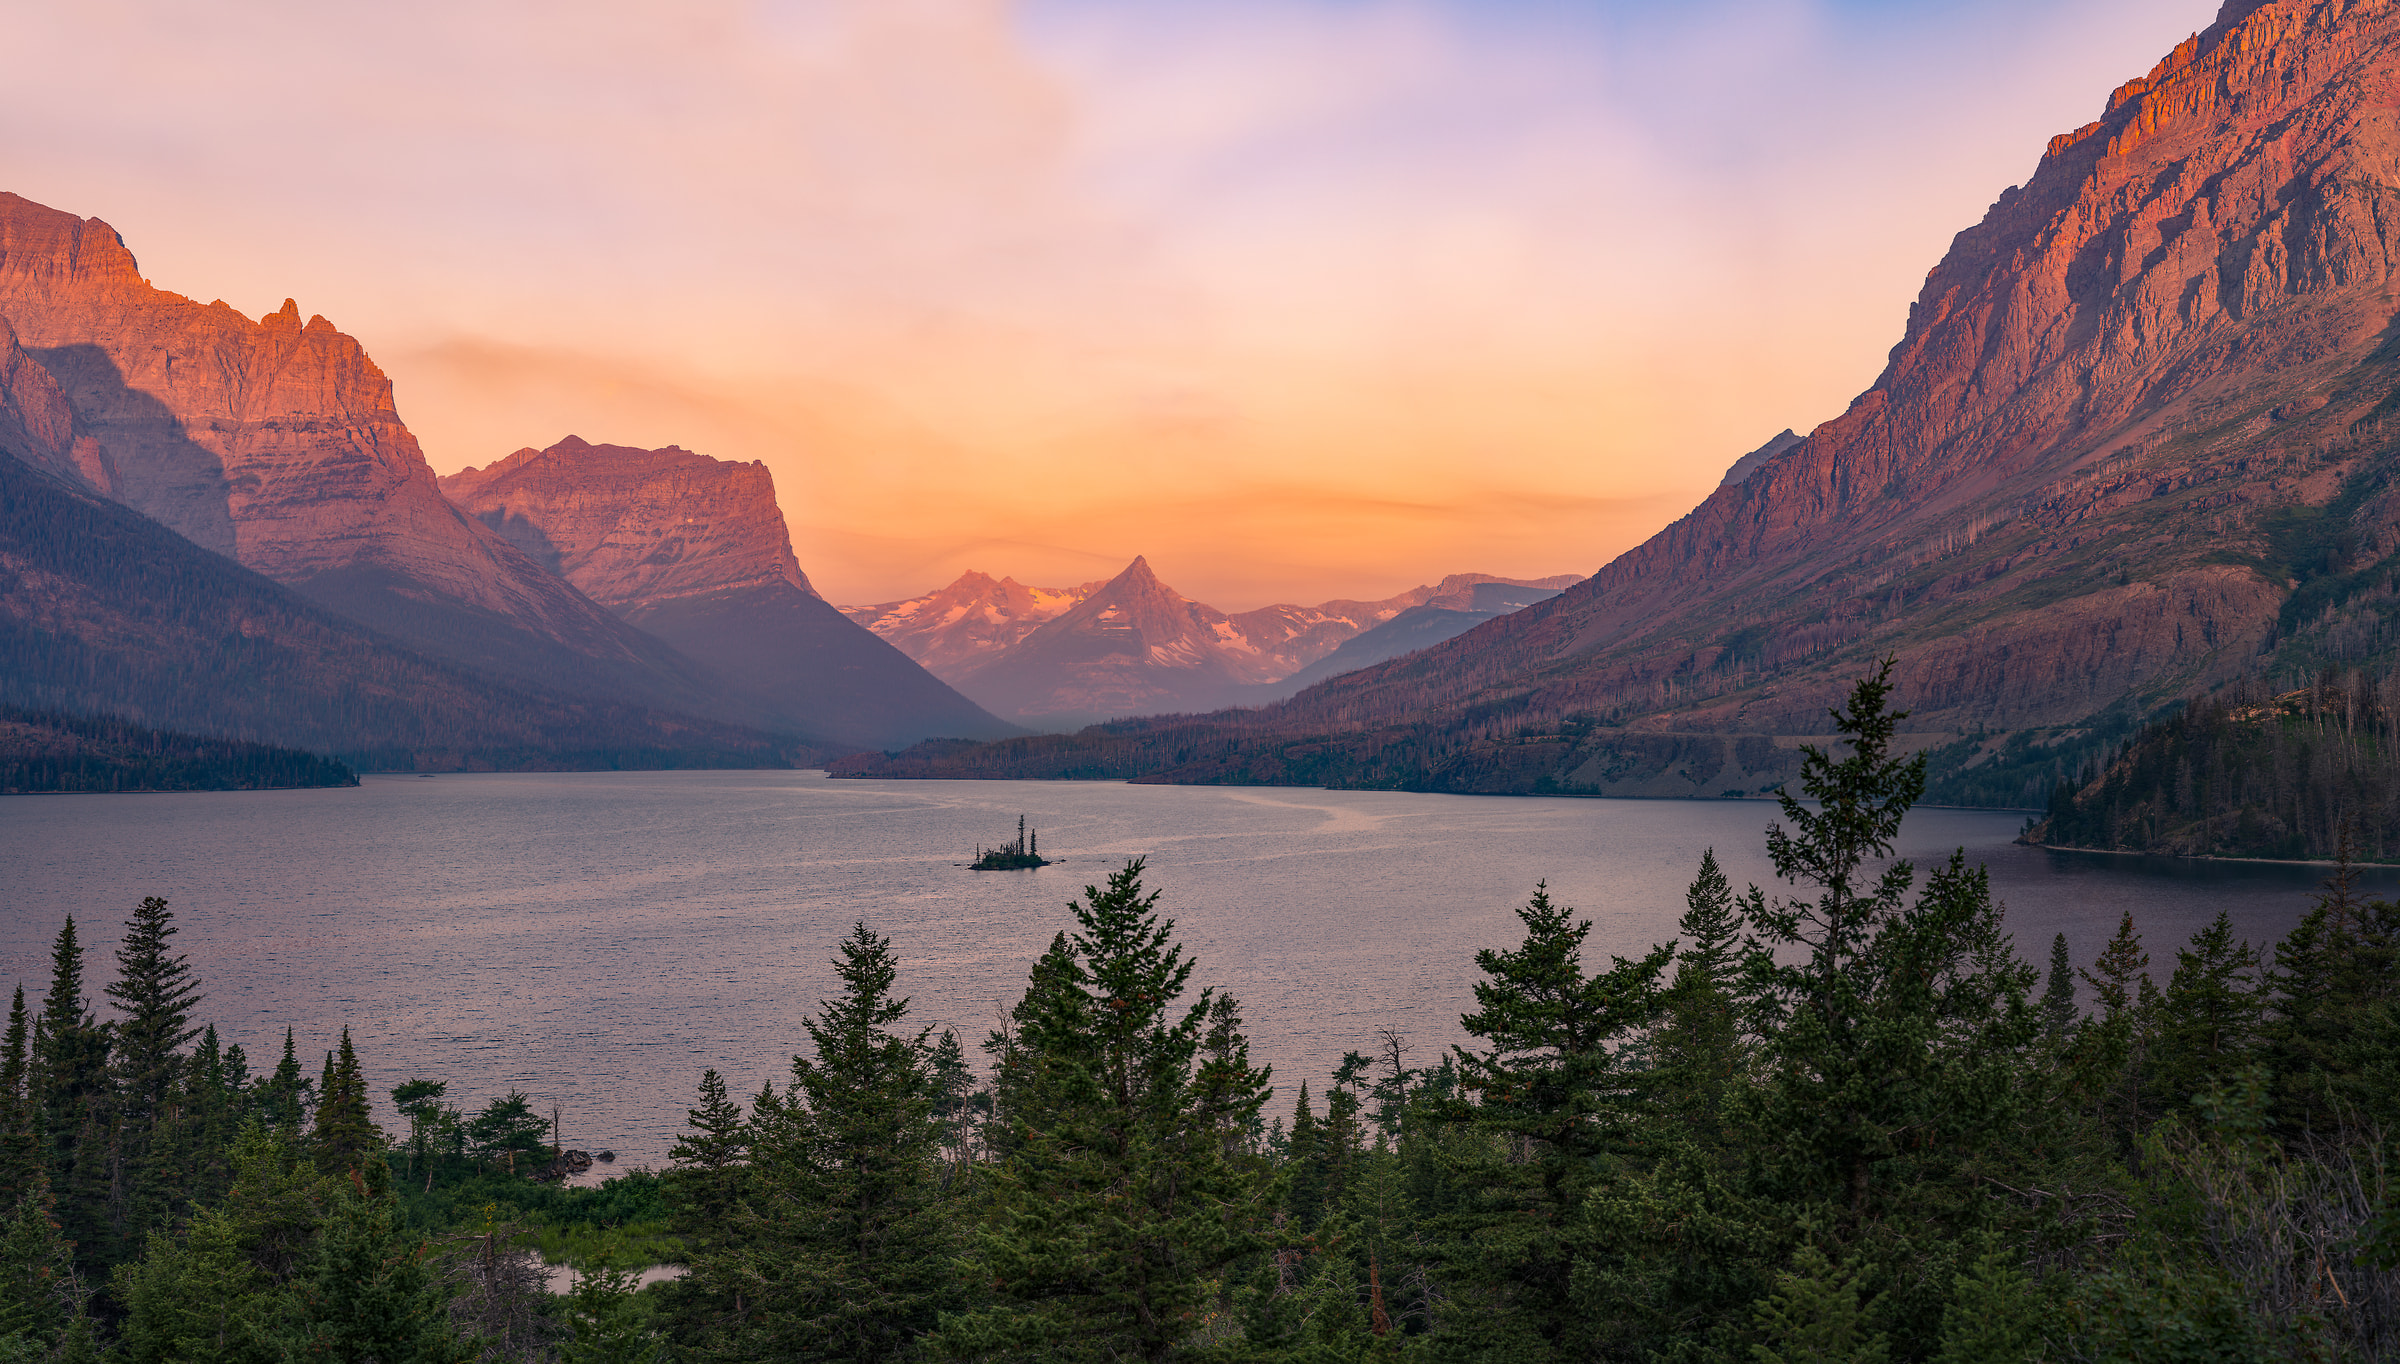 713 megapixels! A very high resolution, large-format VAST photo print of a lake and mountains at sunrise; wallpaper landscape photograph created by Chris Blake in Glacier National Park, Montana